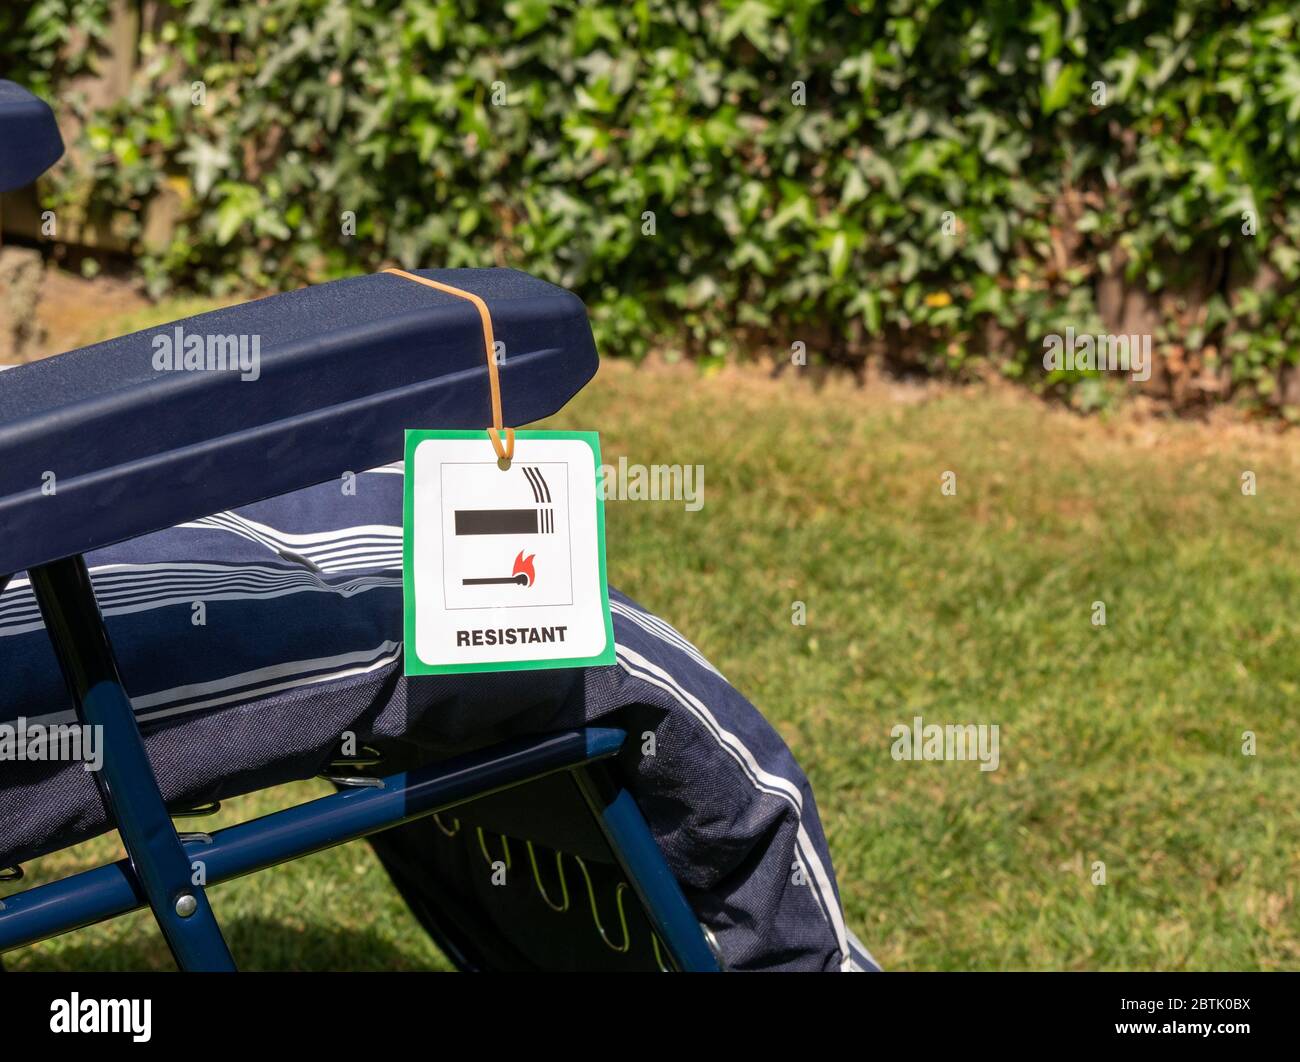 Fire safety regulation label on a sun lounger Stock Photo